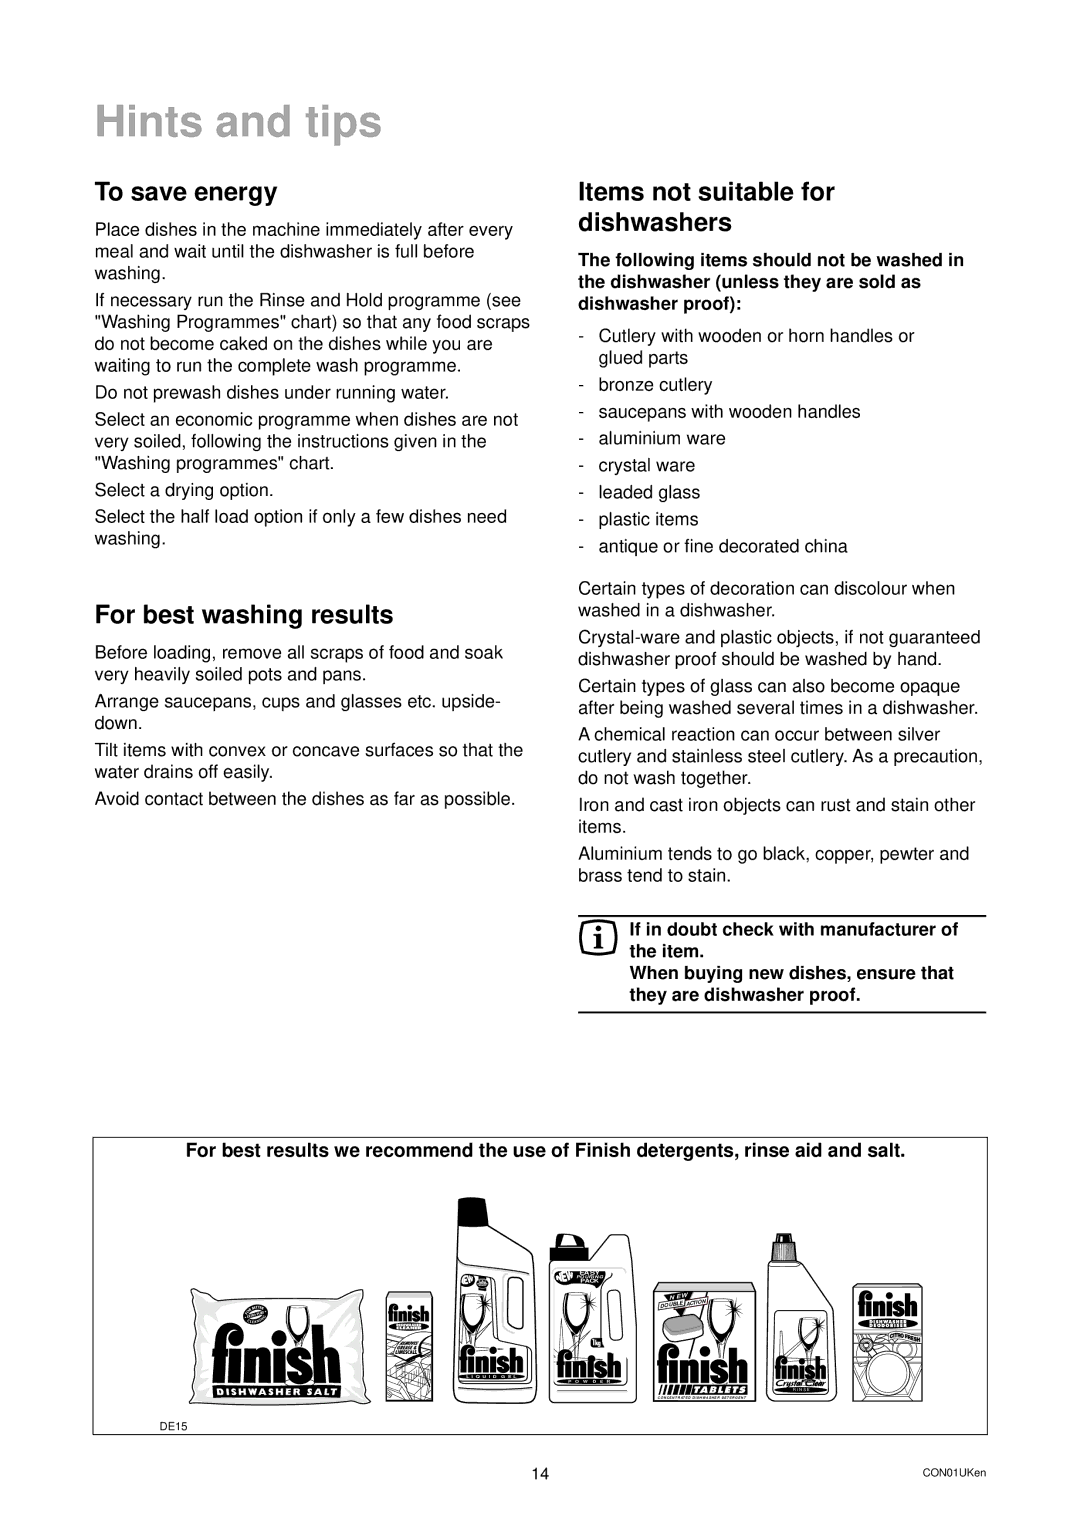 Zanussi ZDS 699 EX manual Hints and tips, To save energy, For best washing results, Items not suitable for dishwashers 